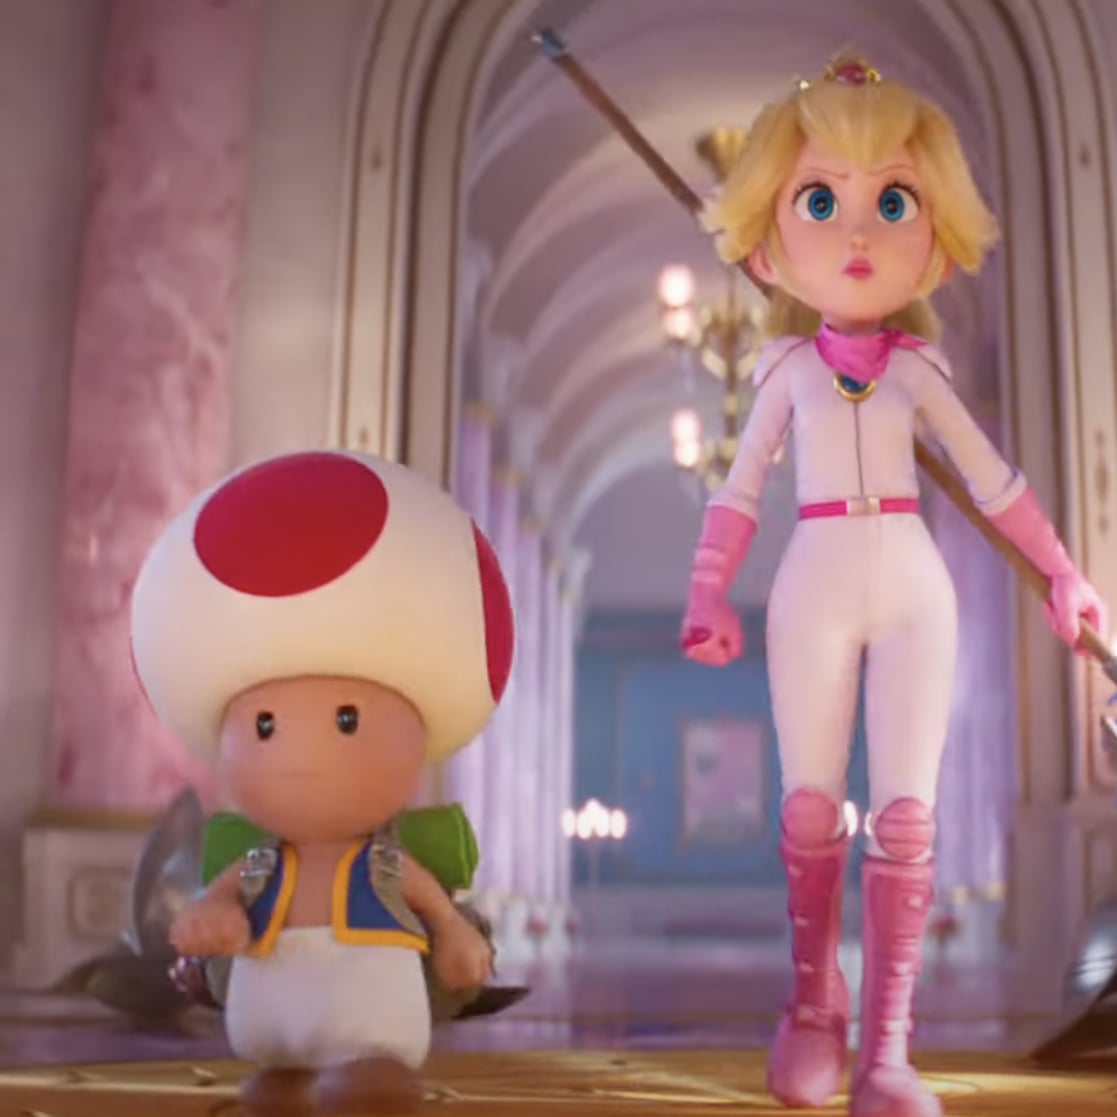 "The Super Mario Bros. Movie" Reveals First Look at Princess Peach in